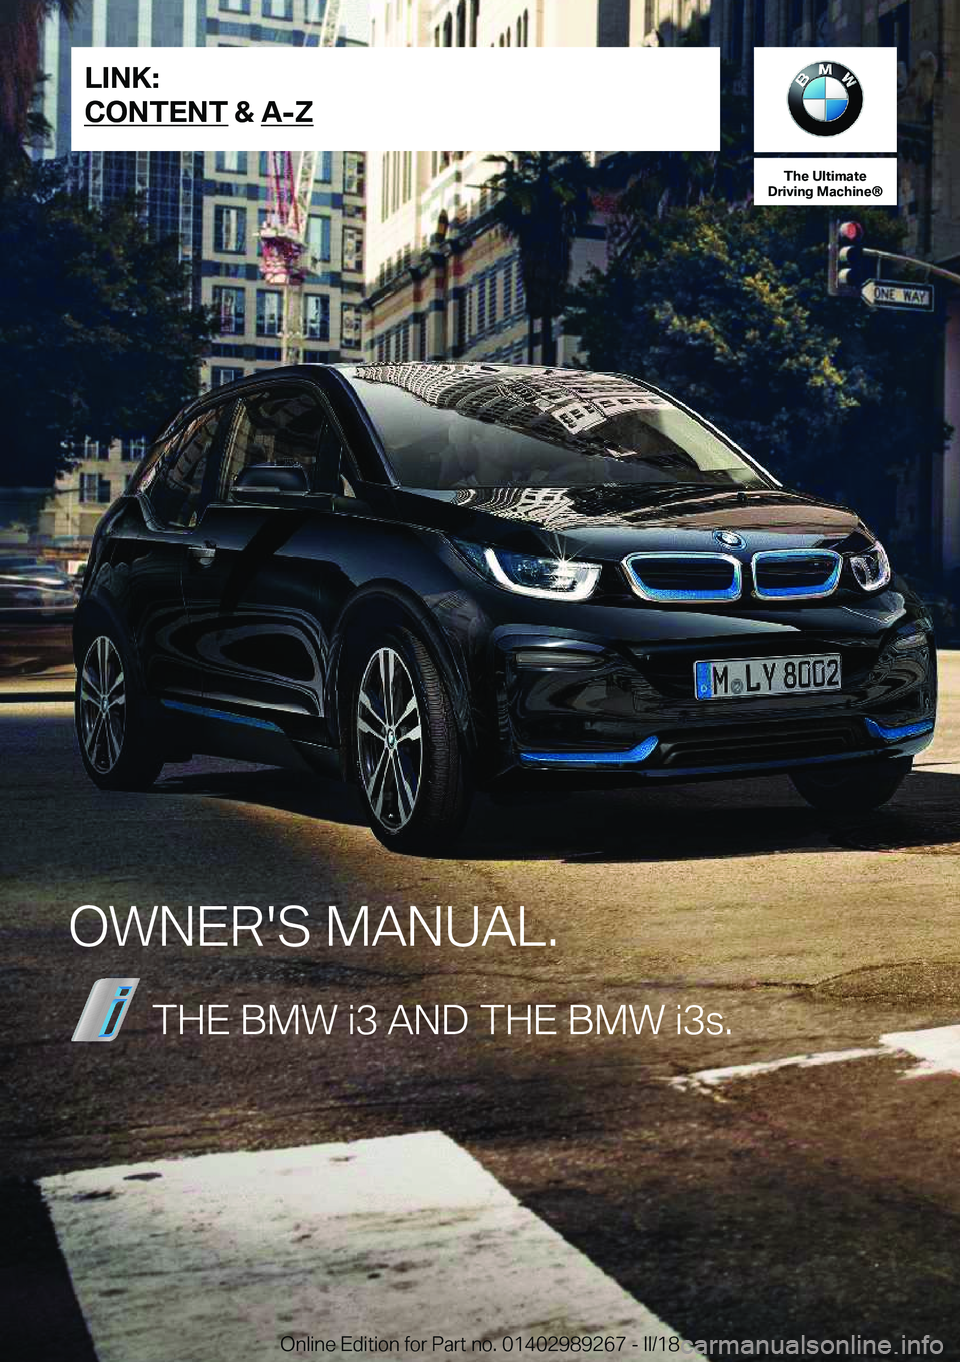 BMW I3 2018  Owners Manual �T�h�e��U�l�U�i�m�B�U�e
�D�S�i�W�i�n�g��M�B�c�h�i�n�e�n
�O�W�N�E�R�'�S� �M�A�N�U�A�L�.�T�H�E� �B�M�W� �i�3� �A�N�D� �T�H�E� �B�M�W� �i�3�s�.�L�I�N�K�:
�C�O�N�T�E�N�T����A��;�O�n�l�i�n�e� �E�